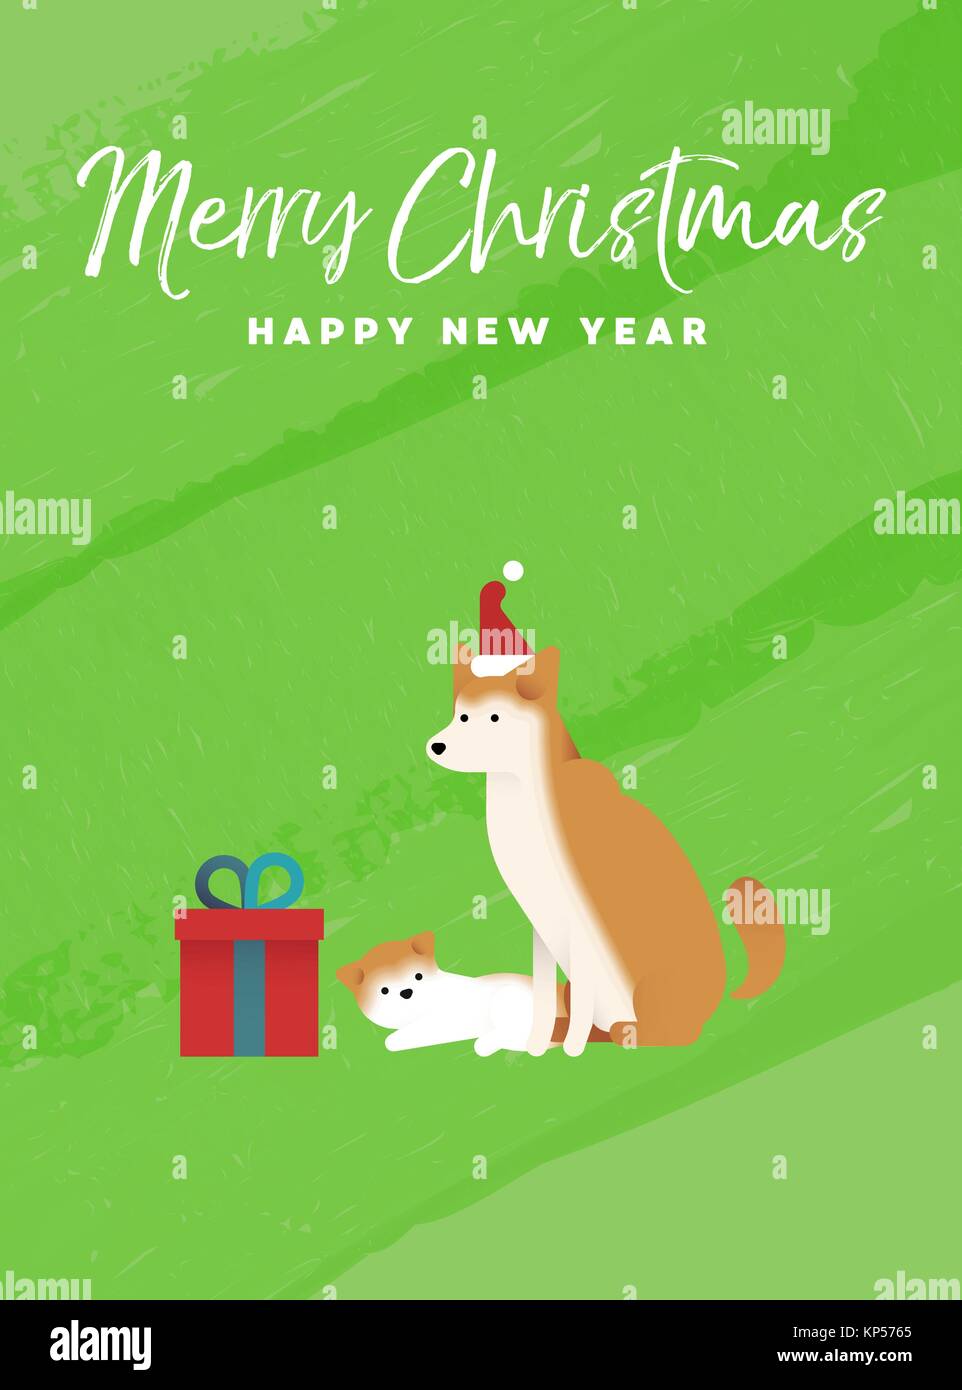 Merry Christmas and Happy New Year holiday greeting card illustration. Shiba inu dog and puppy on colorful texture background. EPS10 vector. Stock Vector